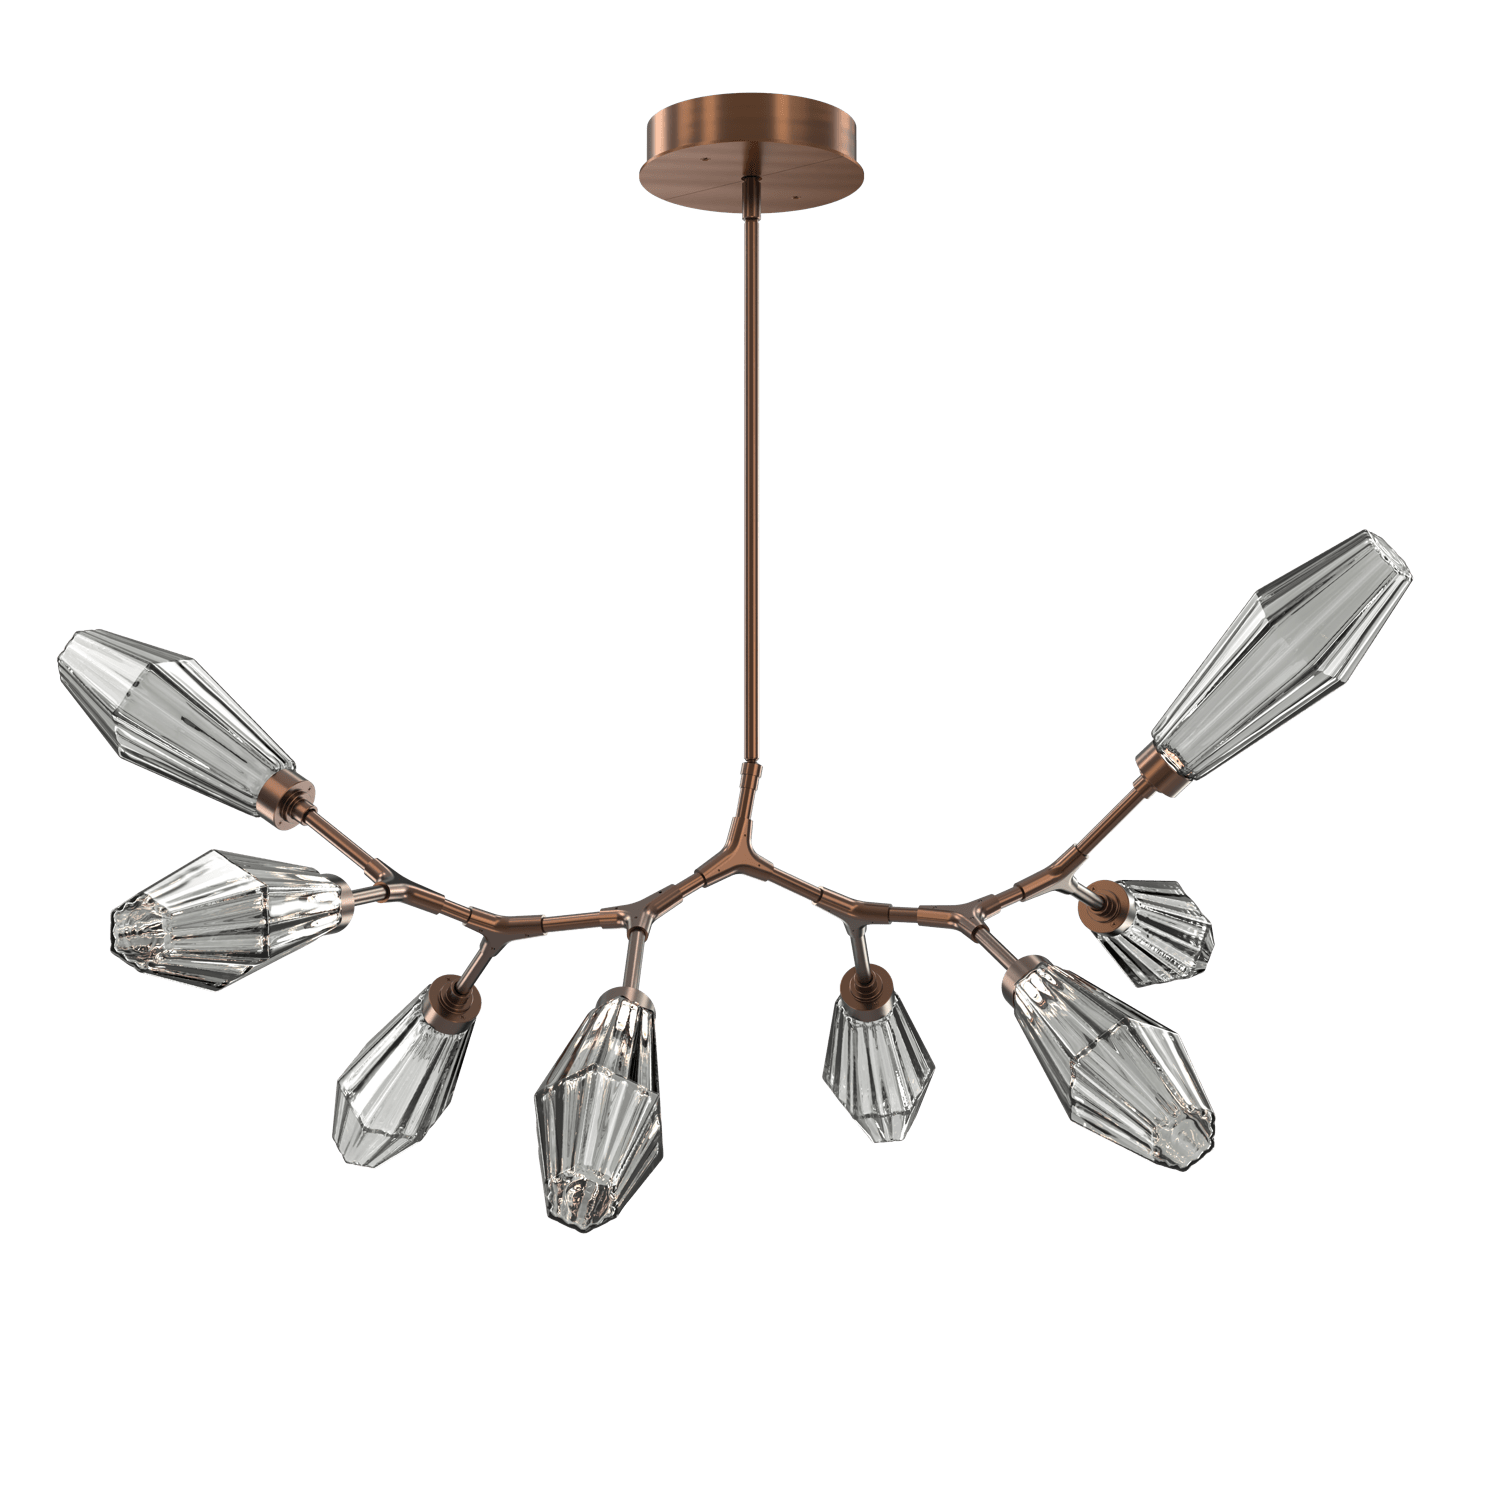 PLB0049-BB-RB-RS-Hammerton-Studio-Aalto-8-light-modern-branch-chandelier-with-oil-rubbed-bronze-finish-and-optic-ribbed-smoke-glass-shades-and-LED-lamping